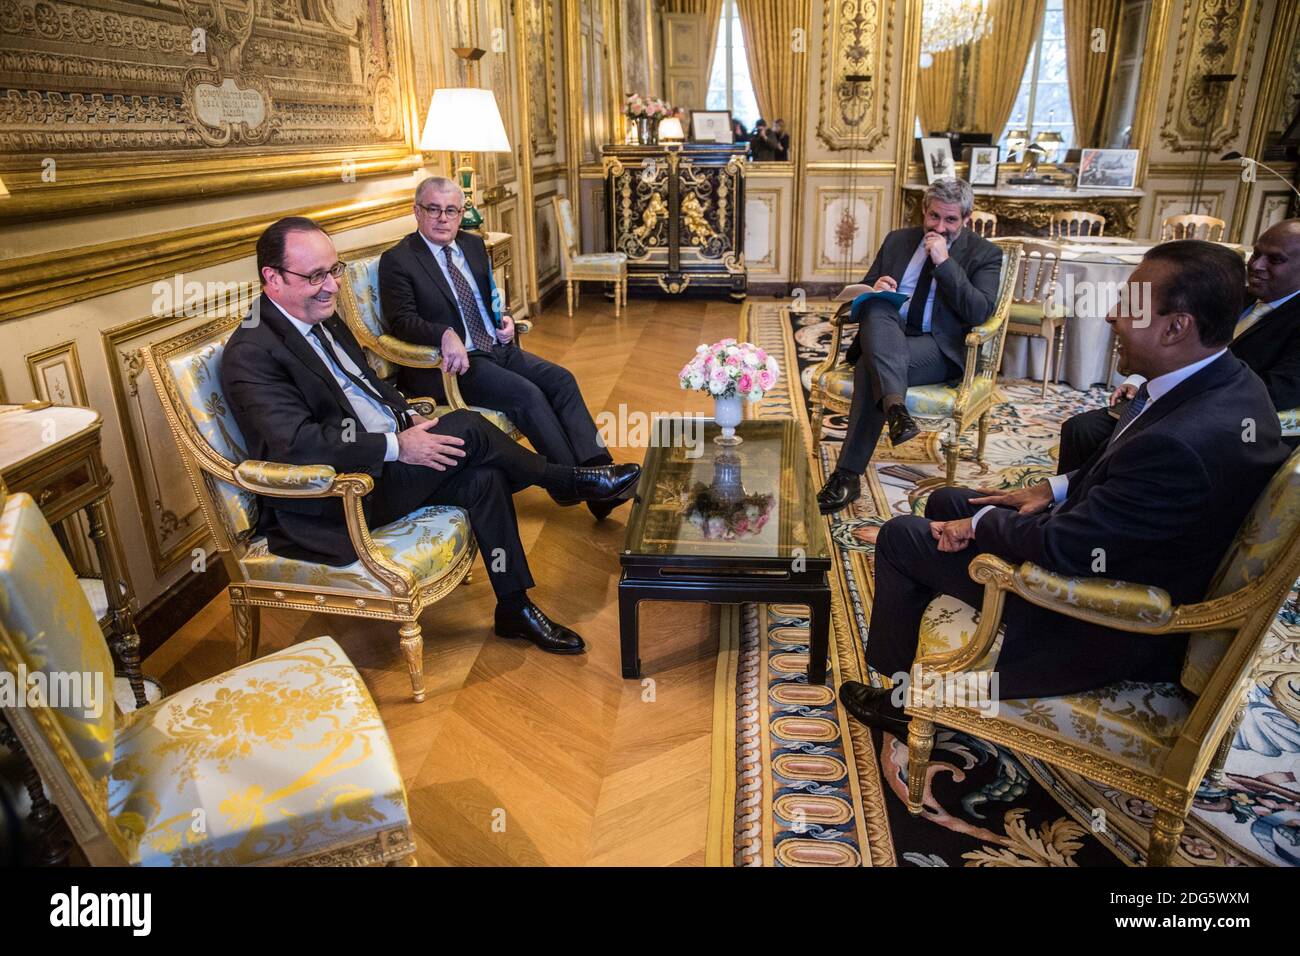 French President Francois Hollande (L) along with his Diplomatic Advisor Jacques Audibert (2nd L) receives Indian business magnate and Reliance Group chairman Anil Ambani (R) at the Elysee Palace in Paris, France on February 21, 2017. Photo by Hamilton/Pool/ABACAPRESS.COM Stock Photo